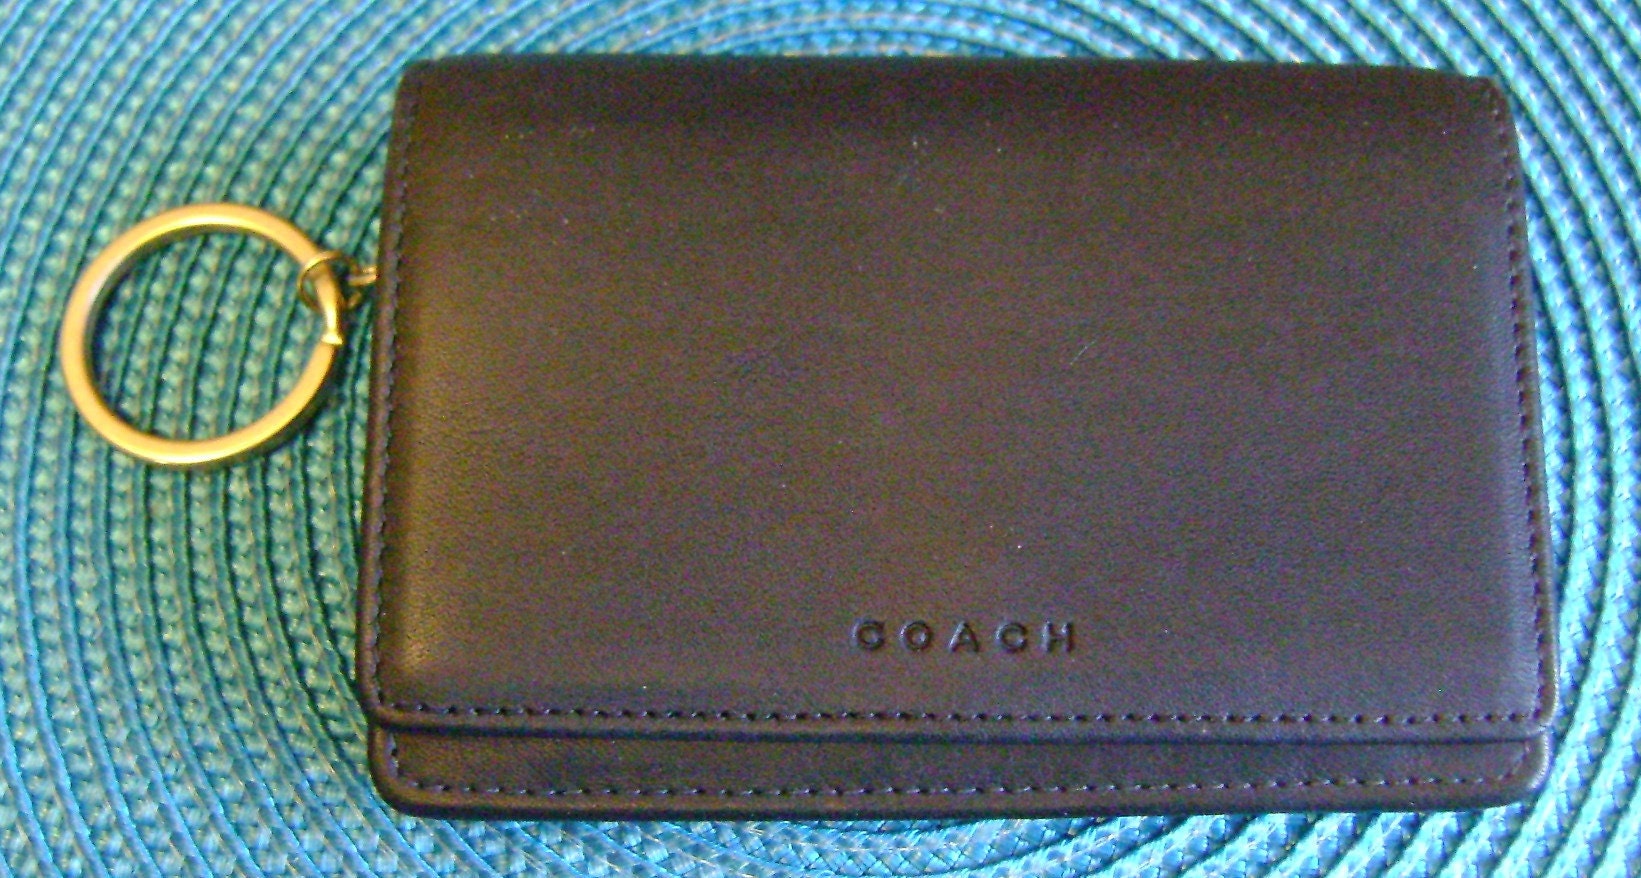 AUTH COACH BI-FOLD COMPACT LEATHER COIN & CARD HOLDER WALLET KEY RING  PREOWNED